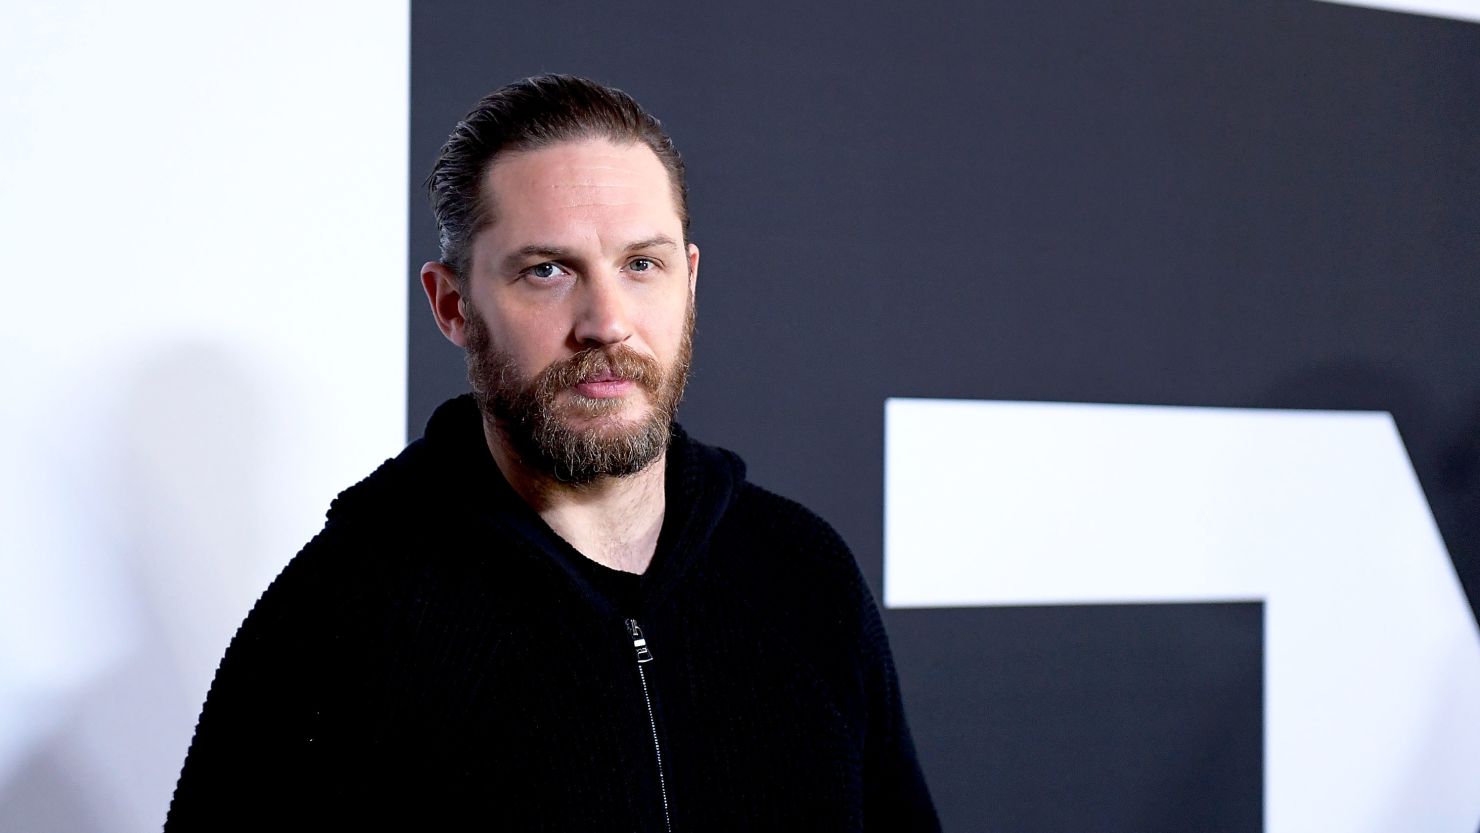 Actor Tom Hardy arrives at the Winter TCA Tour FX Starwalk at Langham Hotel on January 12, 2017 in Pasadena, California.  